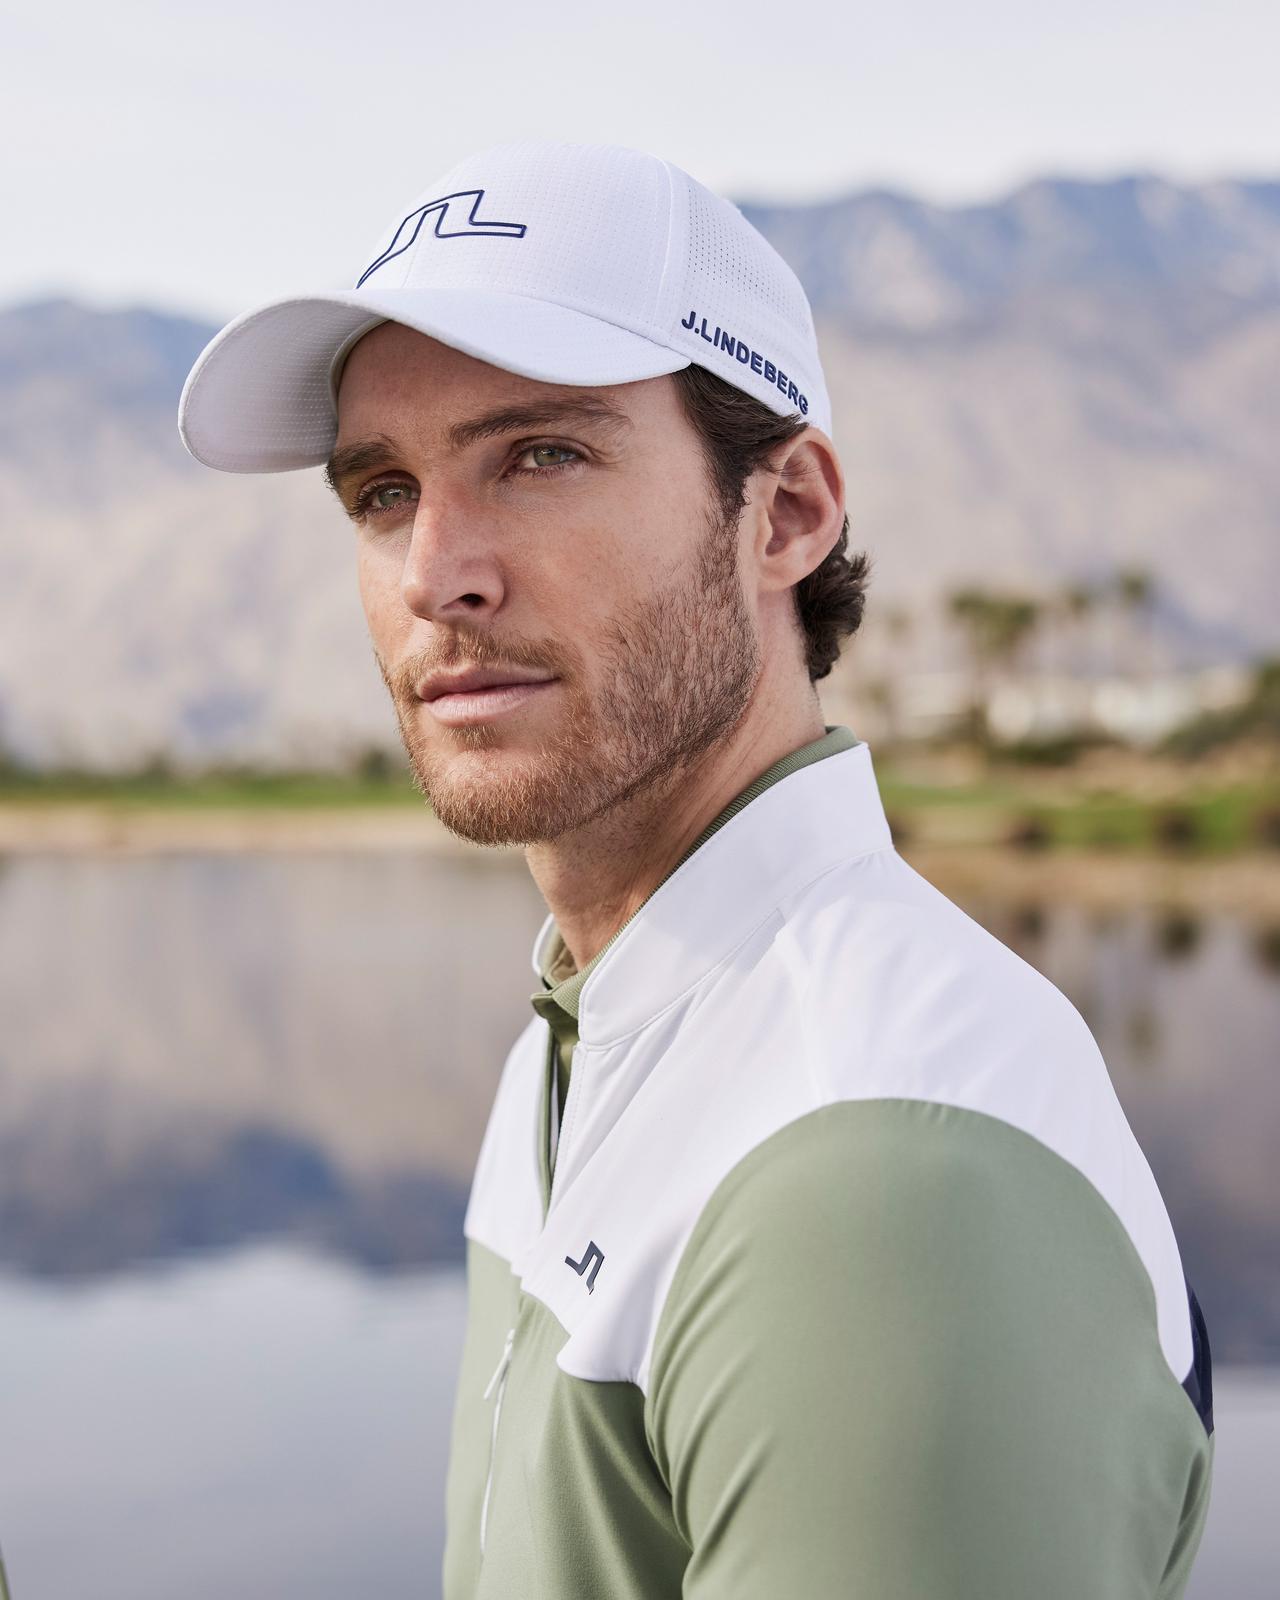 male golfer wearing a baseball cap and colour block sweater